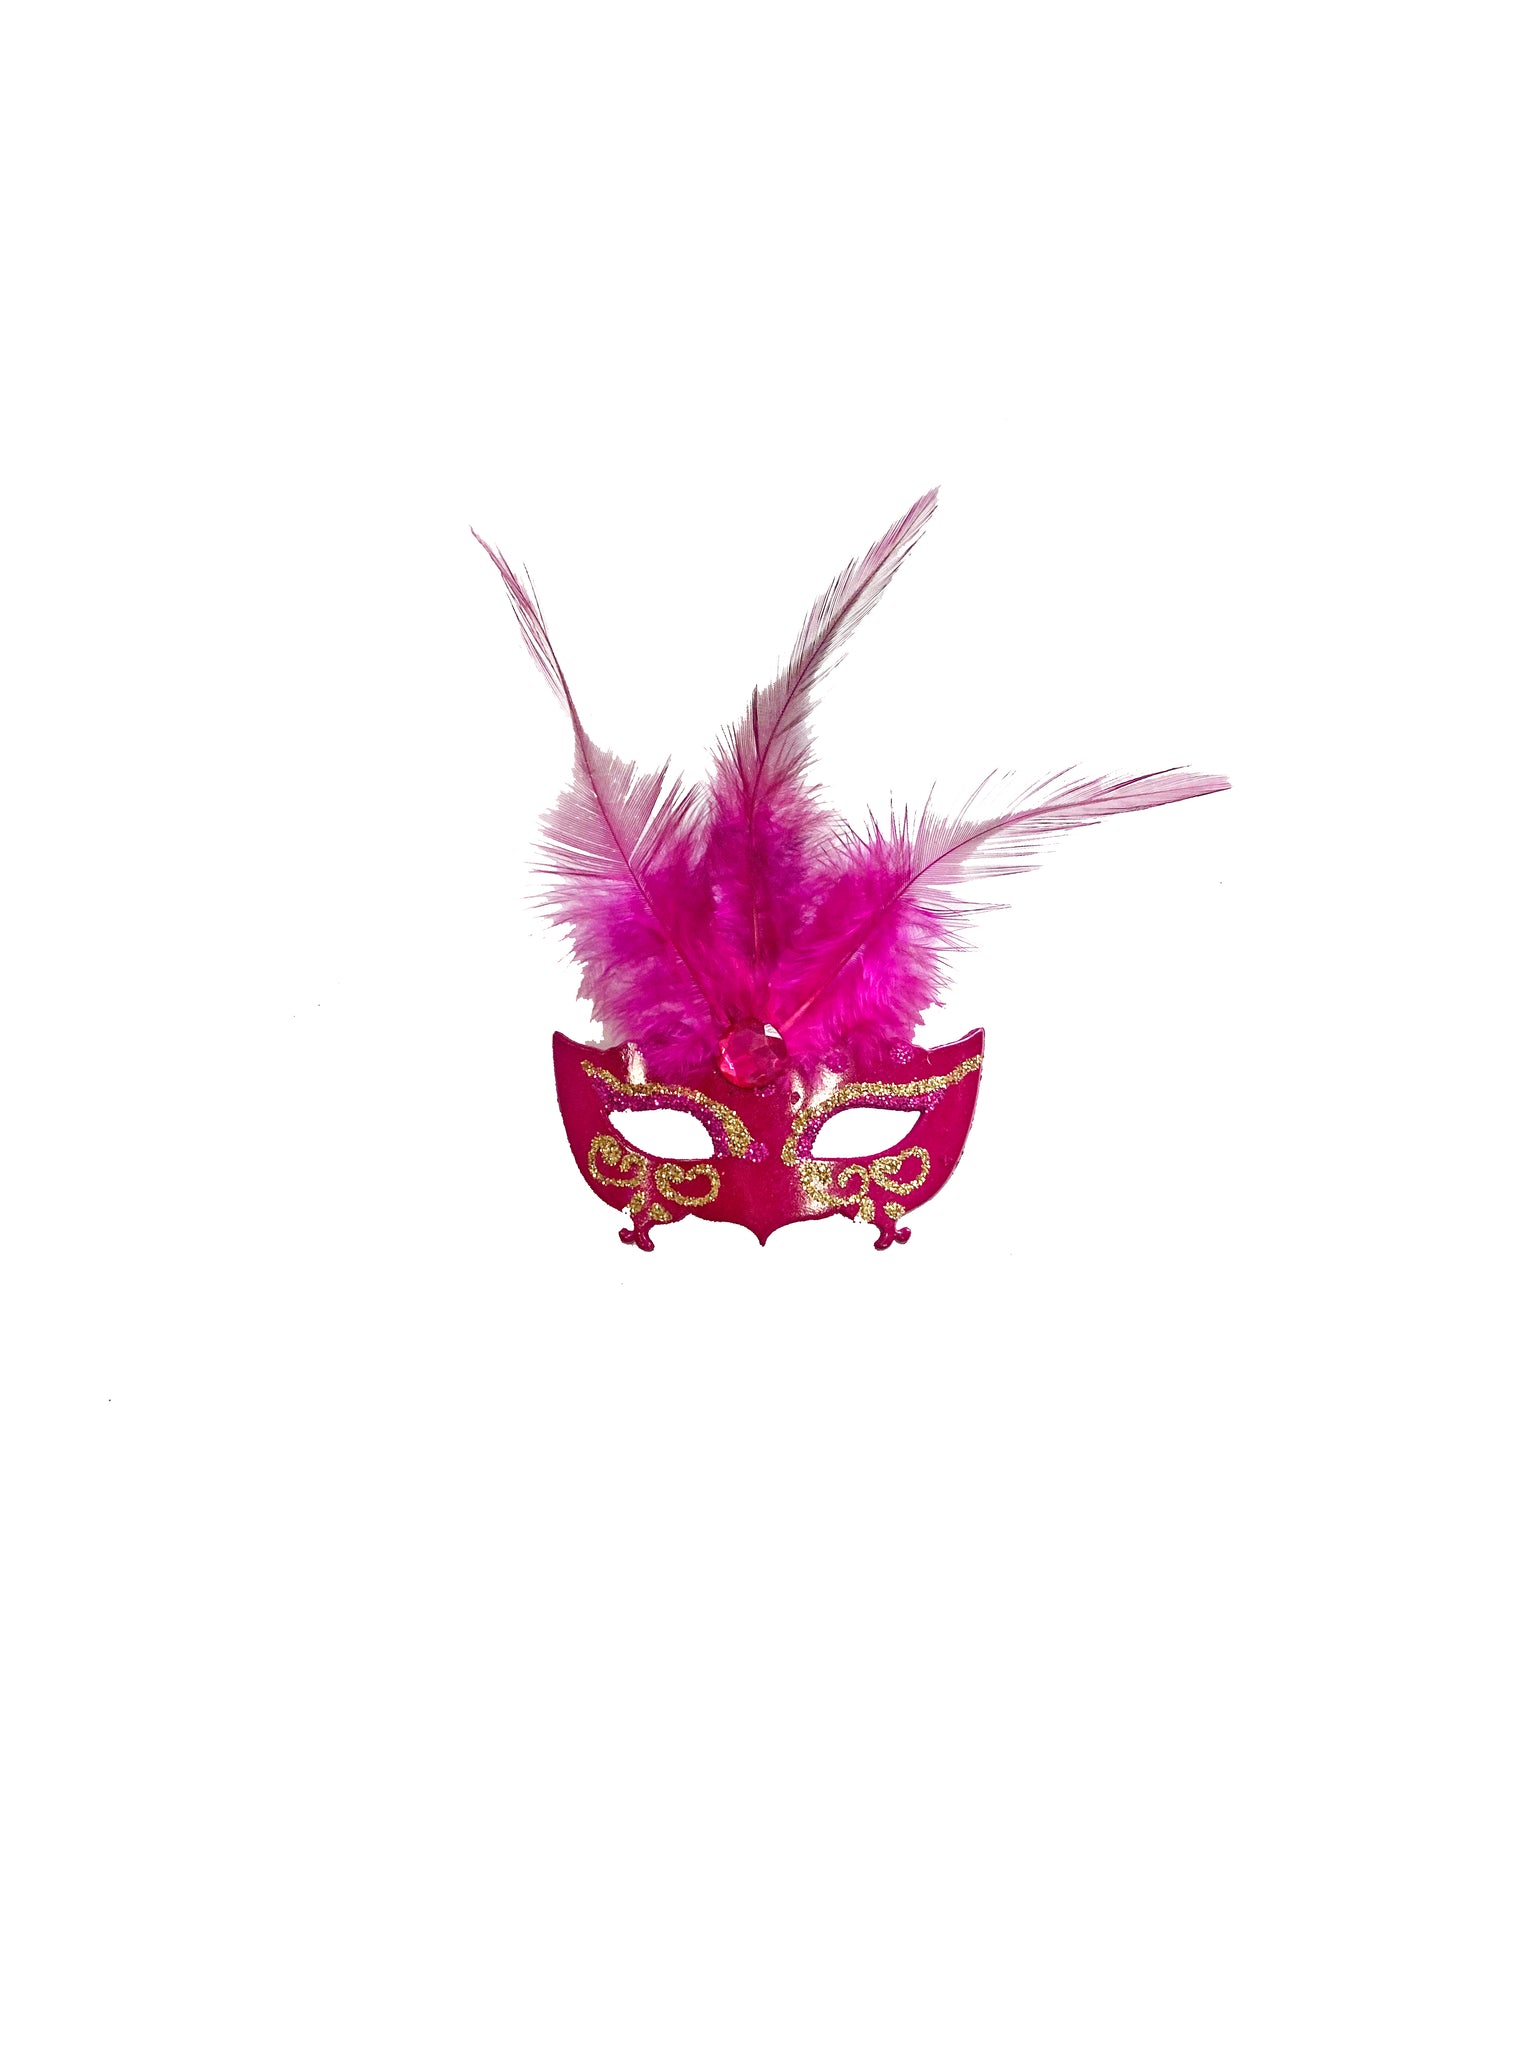 Mardi Gras Creations Bright Pink Solid Color Feather Boas - 12-Pack